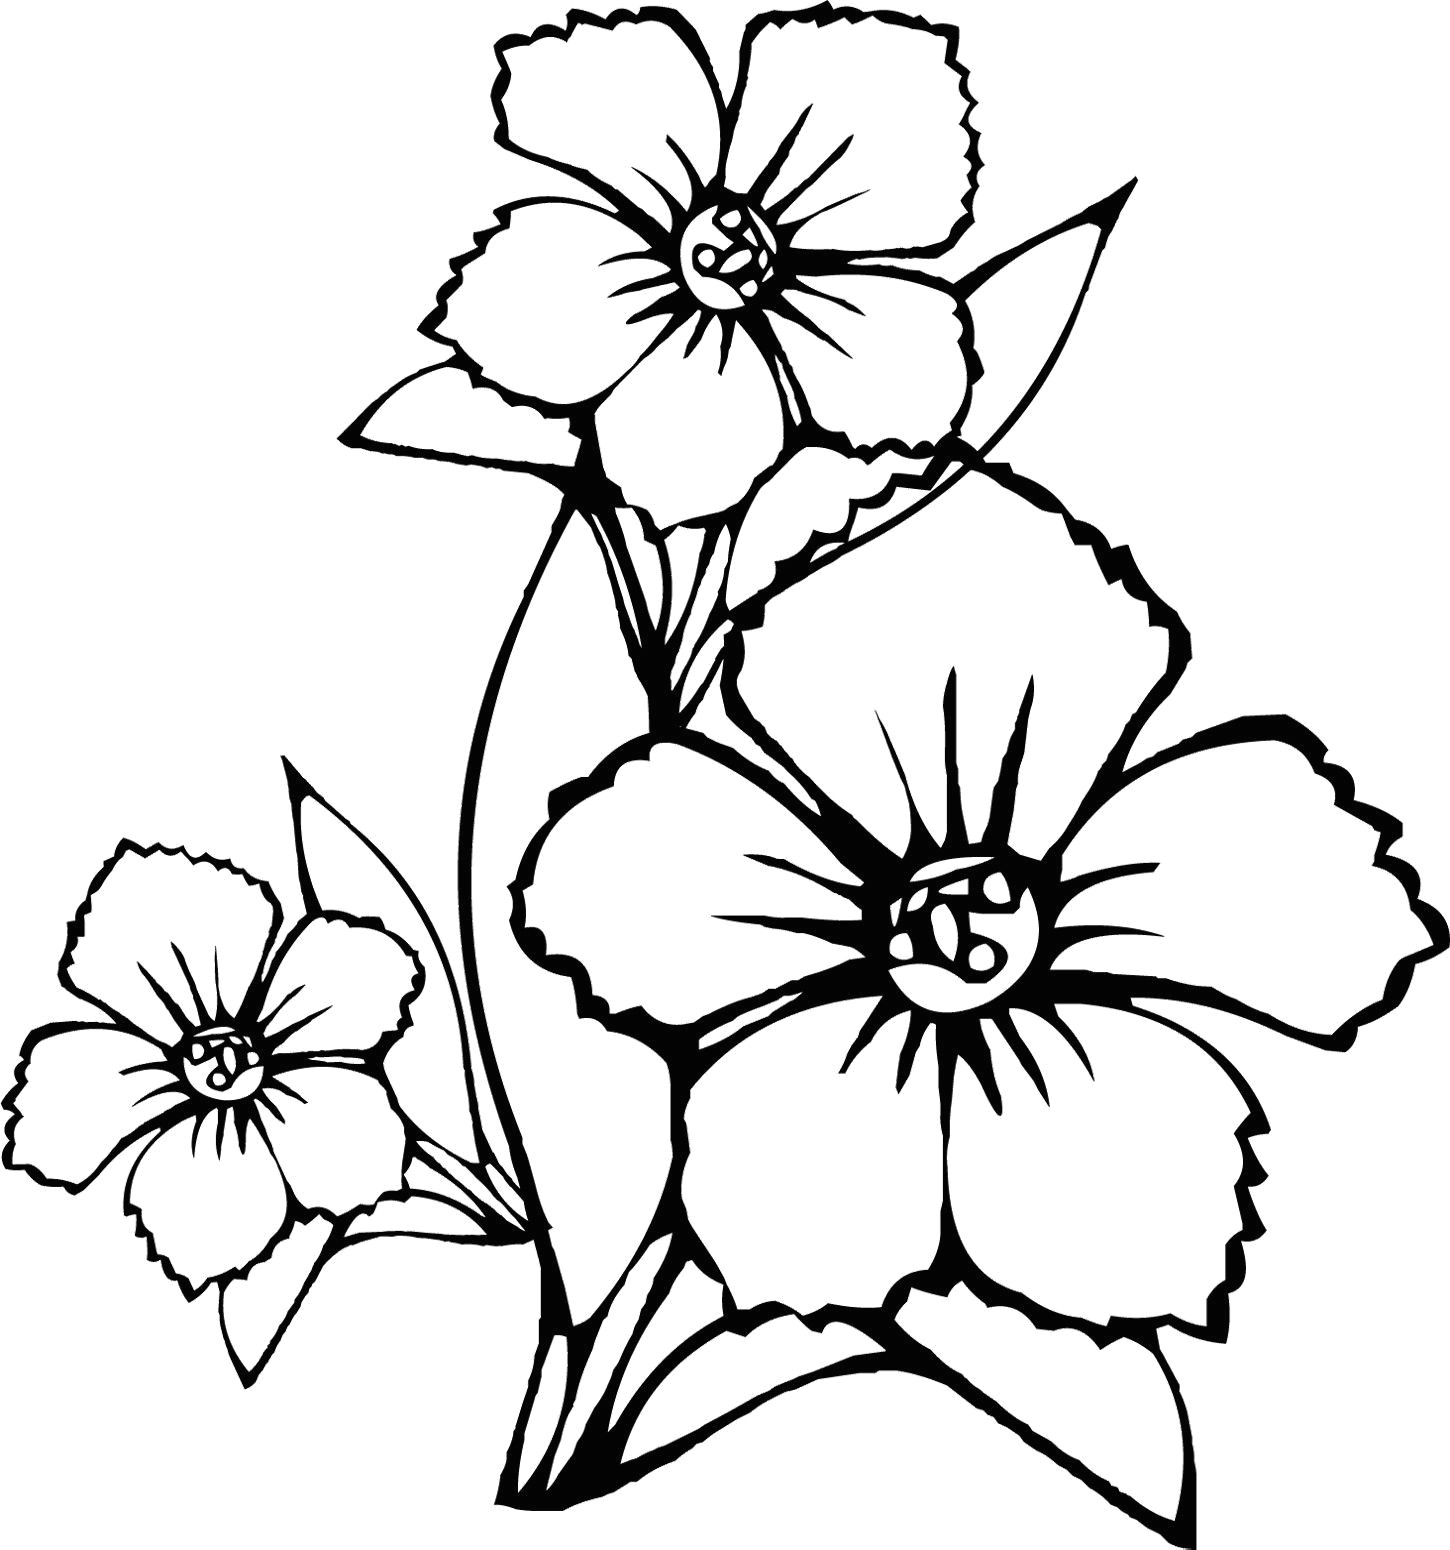 Drawing Images Of Flower Vase How to Draw Flowers Step by Step for Beginners Luxury New Vases